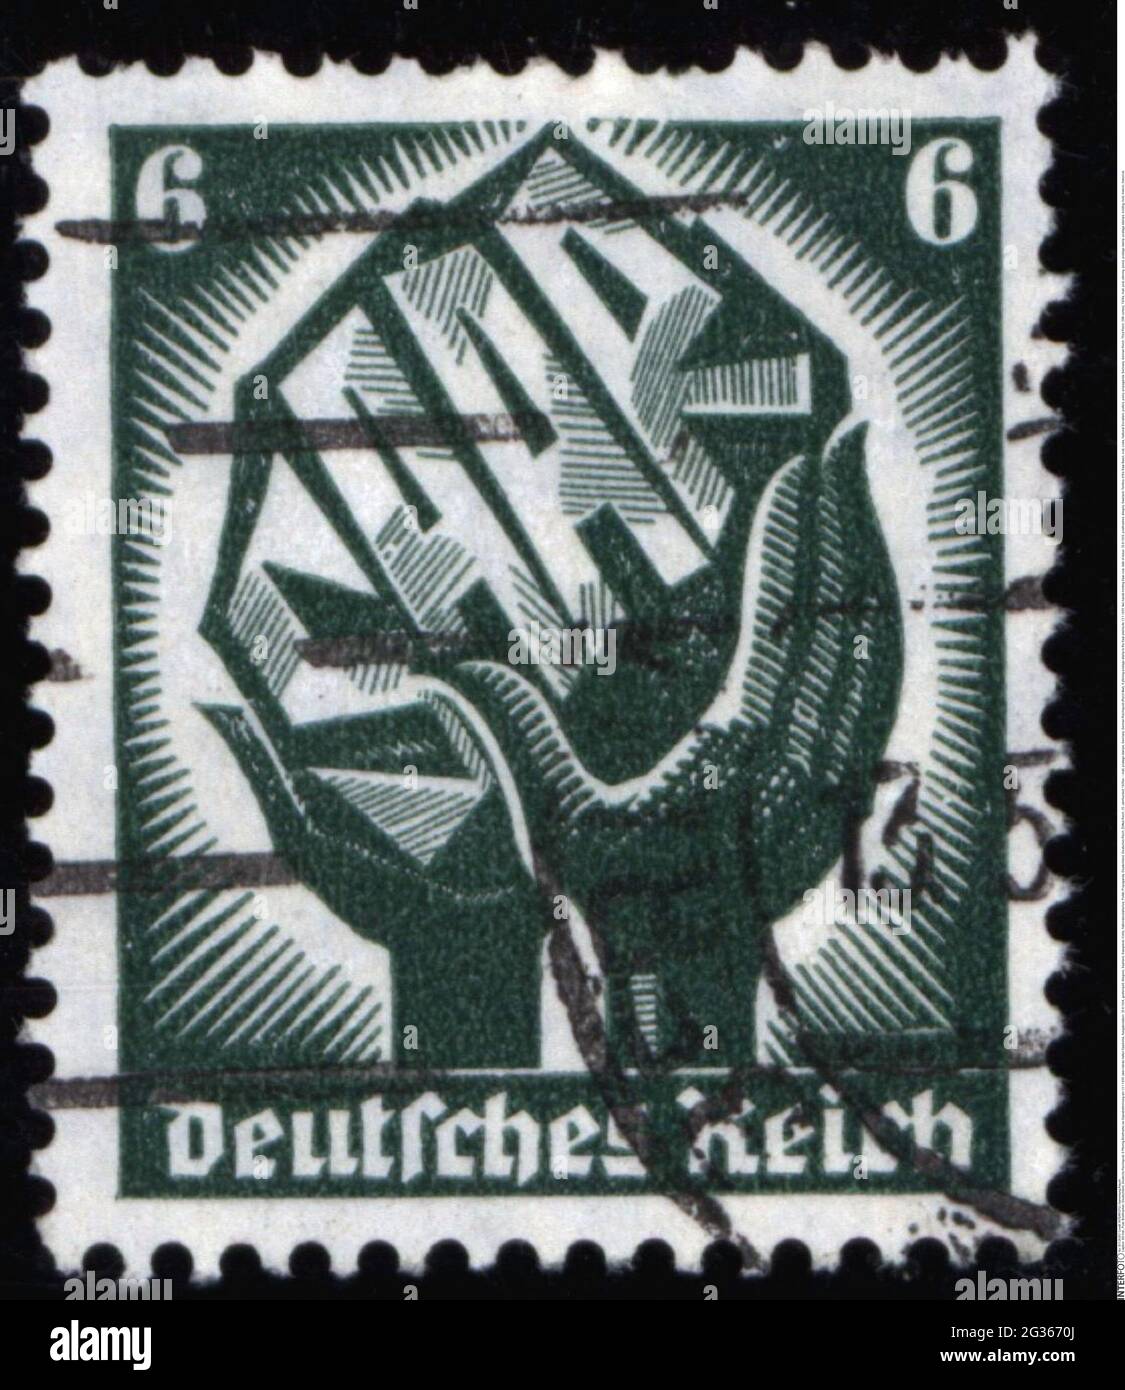 mail, postage stamps, Germany, German Reichspost (Reich Mail), 6 pfennig postage stamp to the Saar plebiscite 13.1.1935, EDITORIAL-USE-ONLY Stock Photo